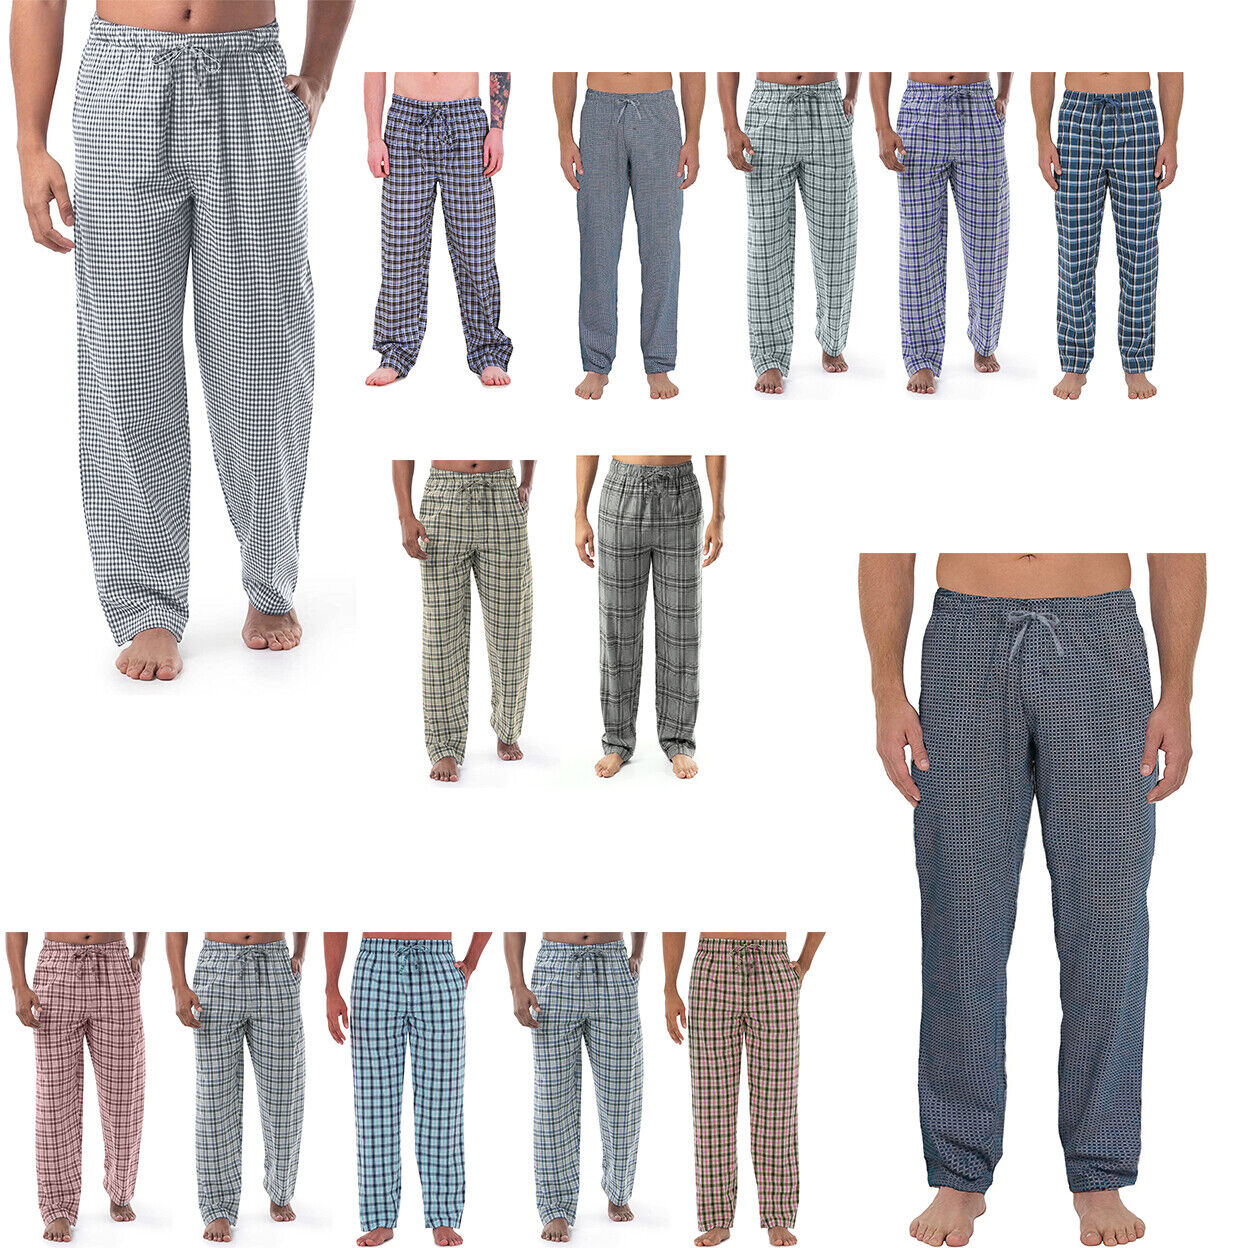 2-Pack: Men's Ultra-Soft Solid & Plaid Cotton Jersey Knit Comfy Sleep Lounge Pajama Pants - Solid & Plaid, Small